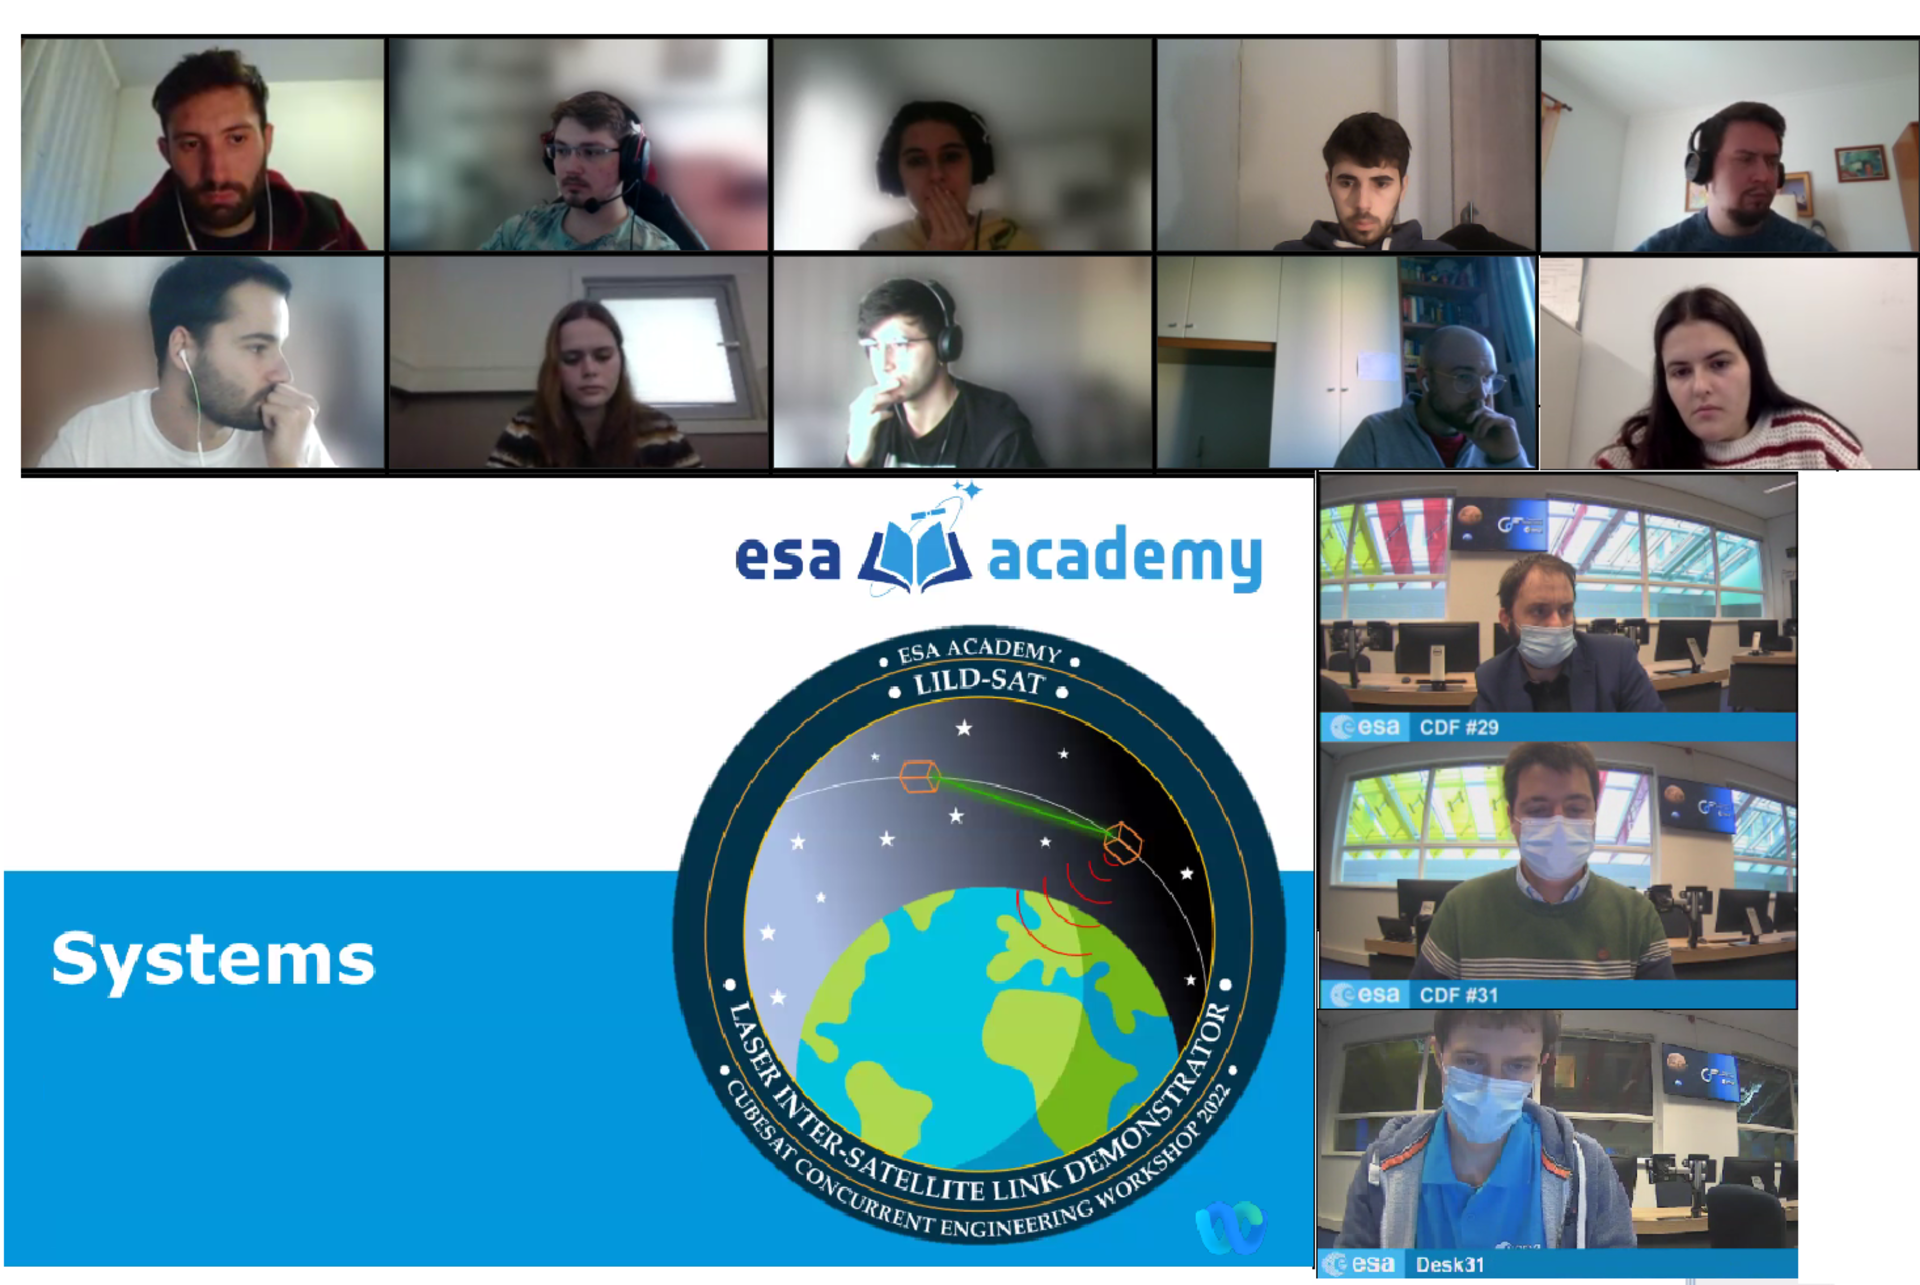 University students present their results to experts from ESA's Systems and Concurrent Engineering Section